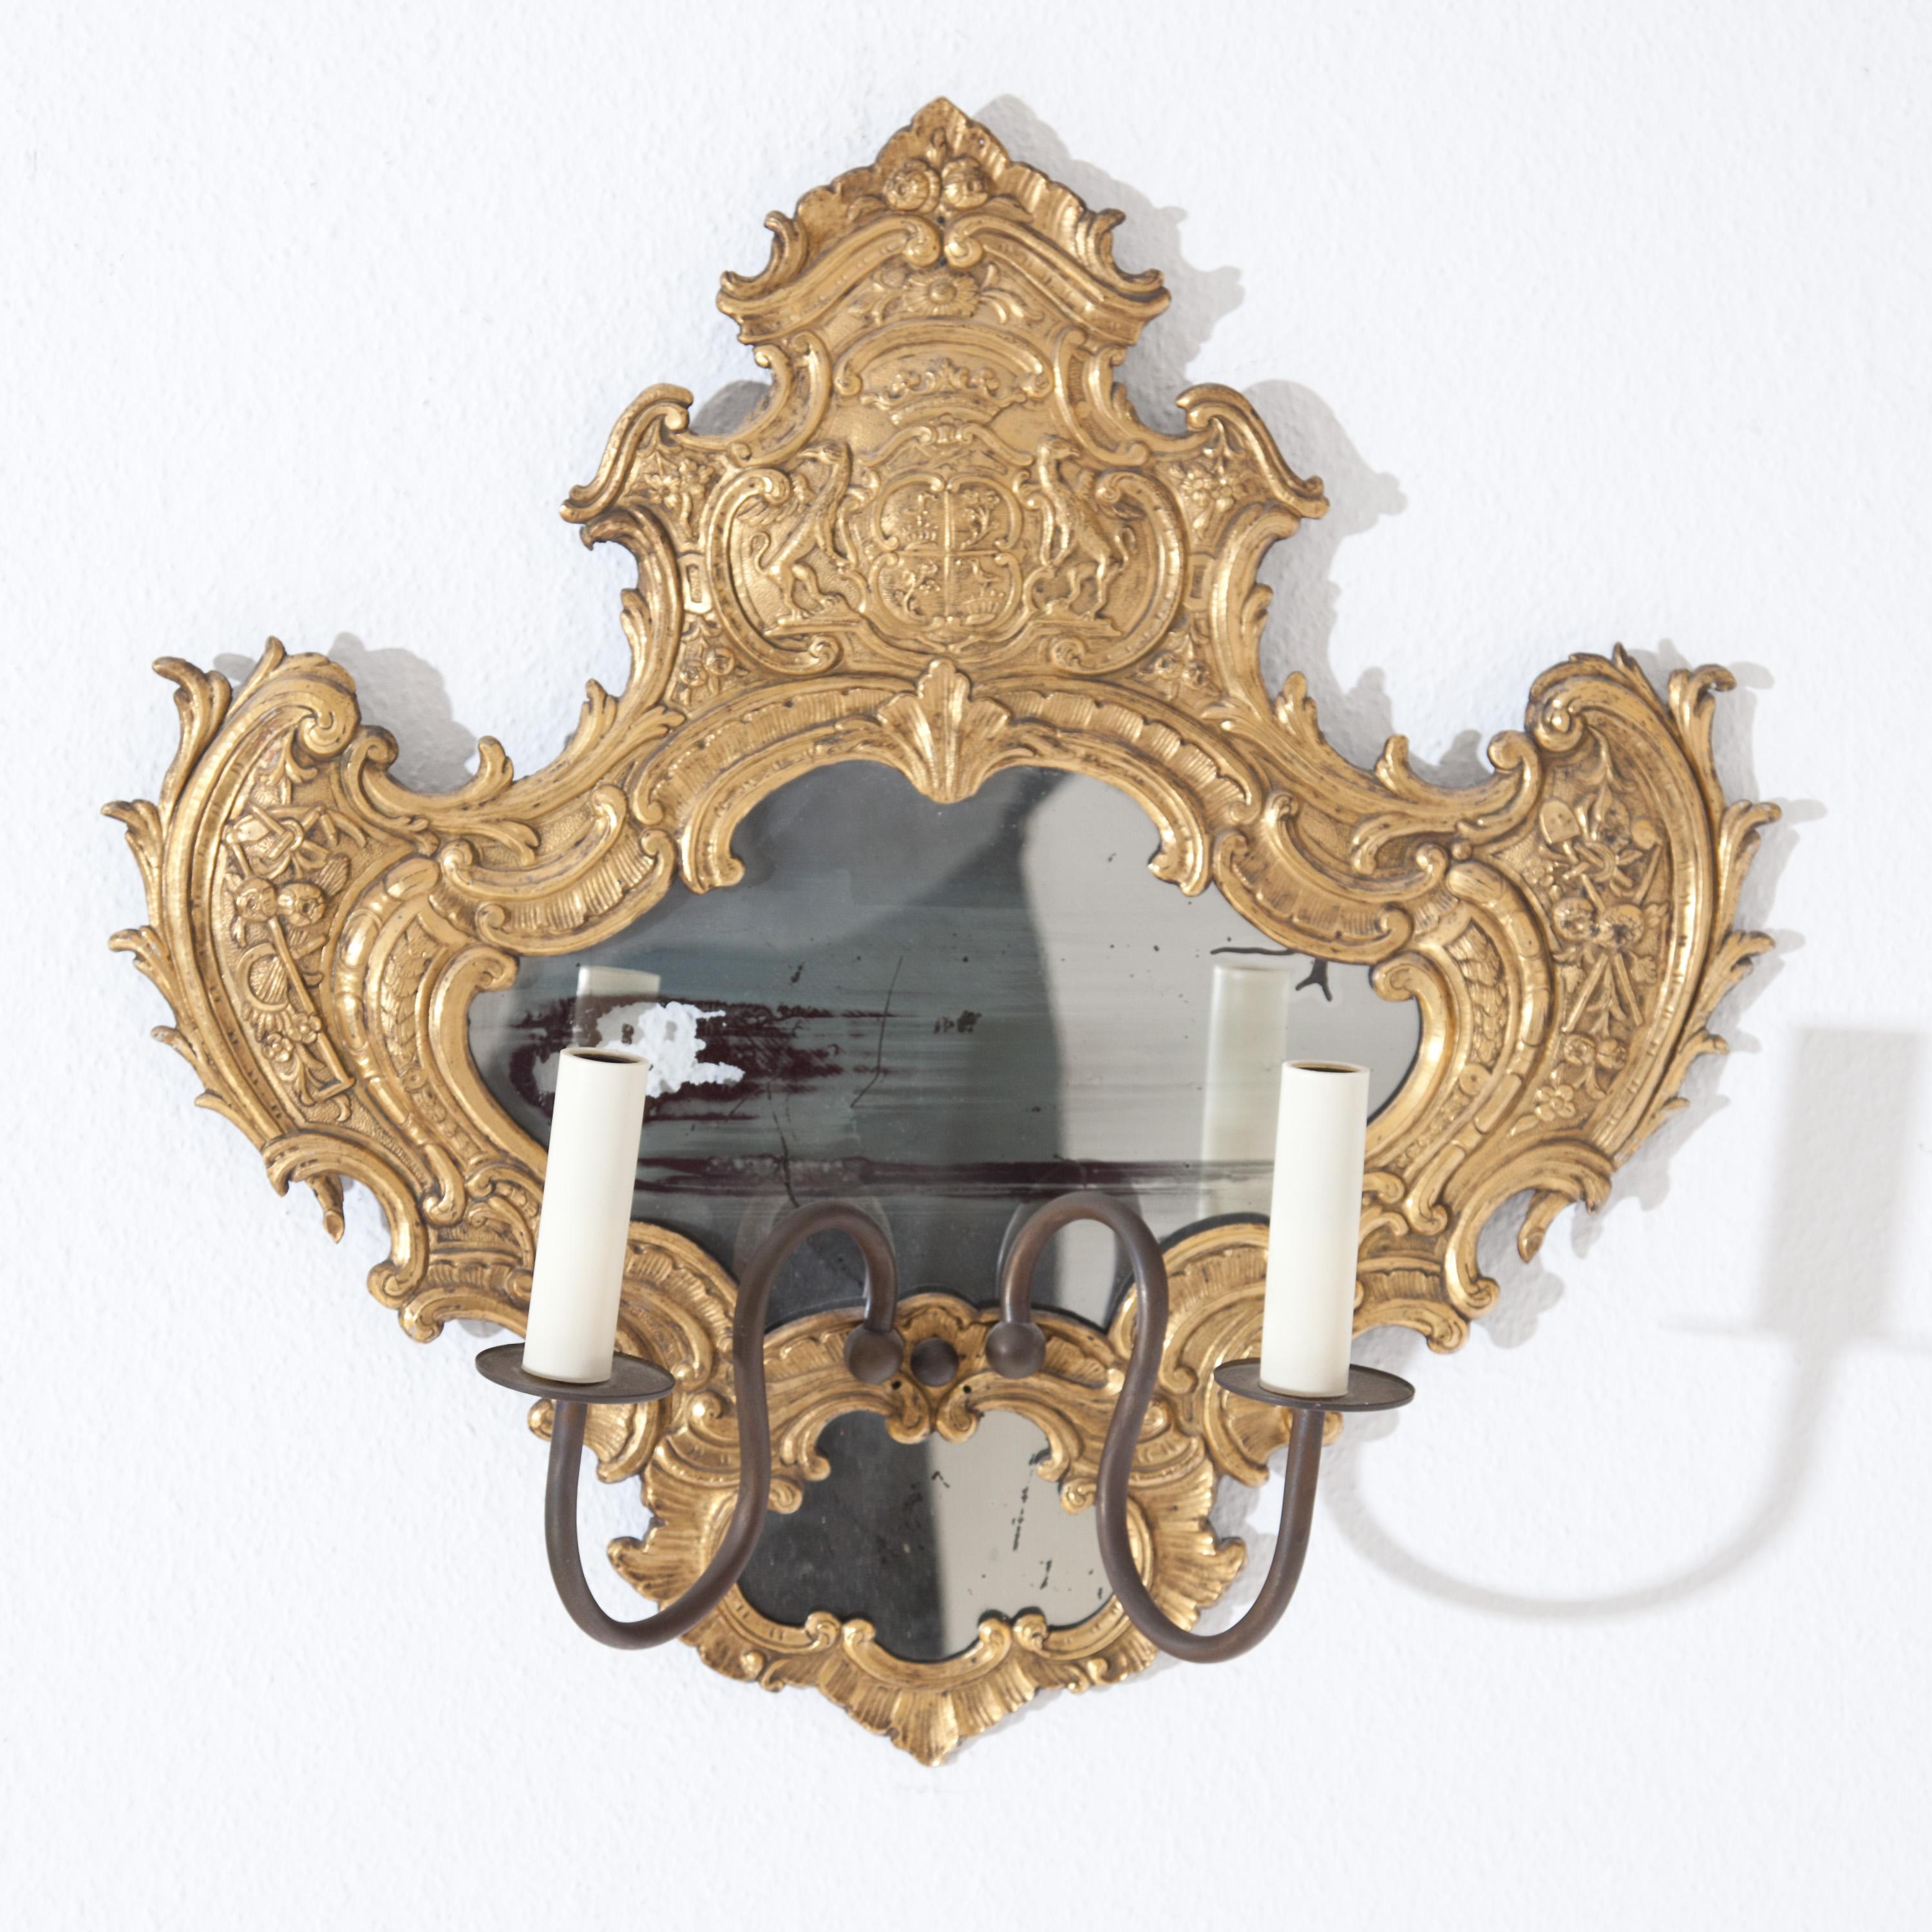 Symmetrically designed, mirrored wall application made of fire-gilded bronze. The movingly designed frame with rocailles, shells and clasp decoration as well as harvesting tools and crowning coat of arms. Two sockets, later electrified. For the